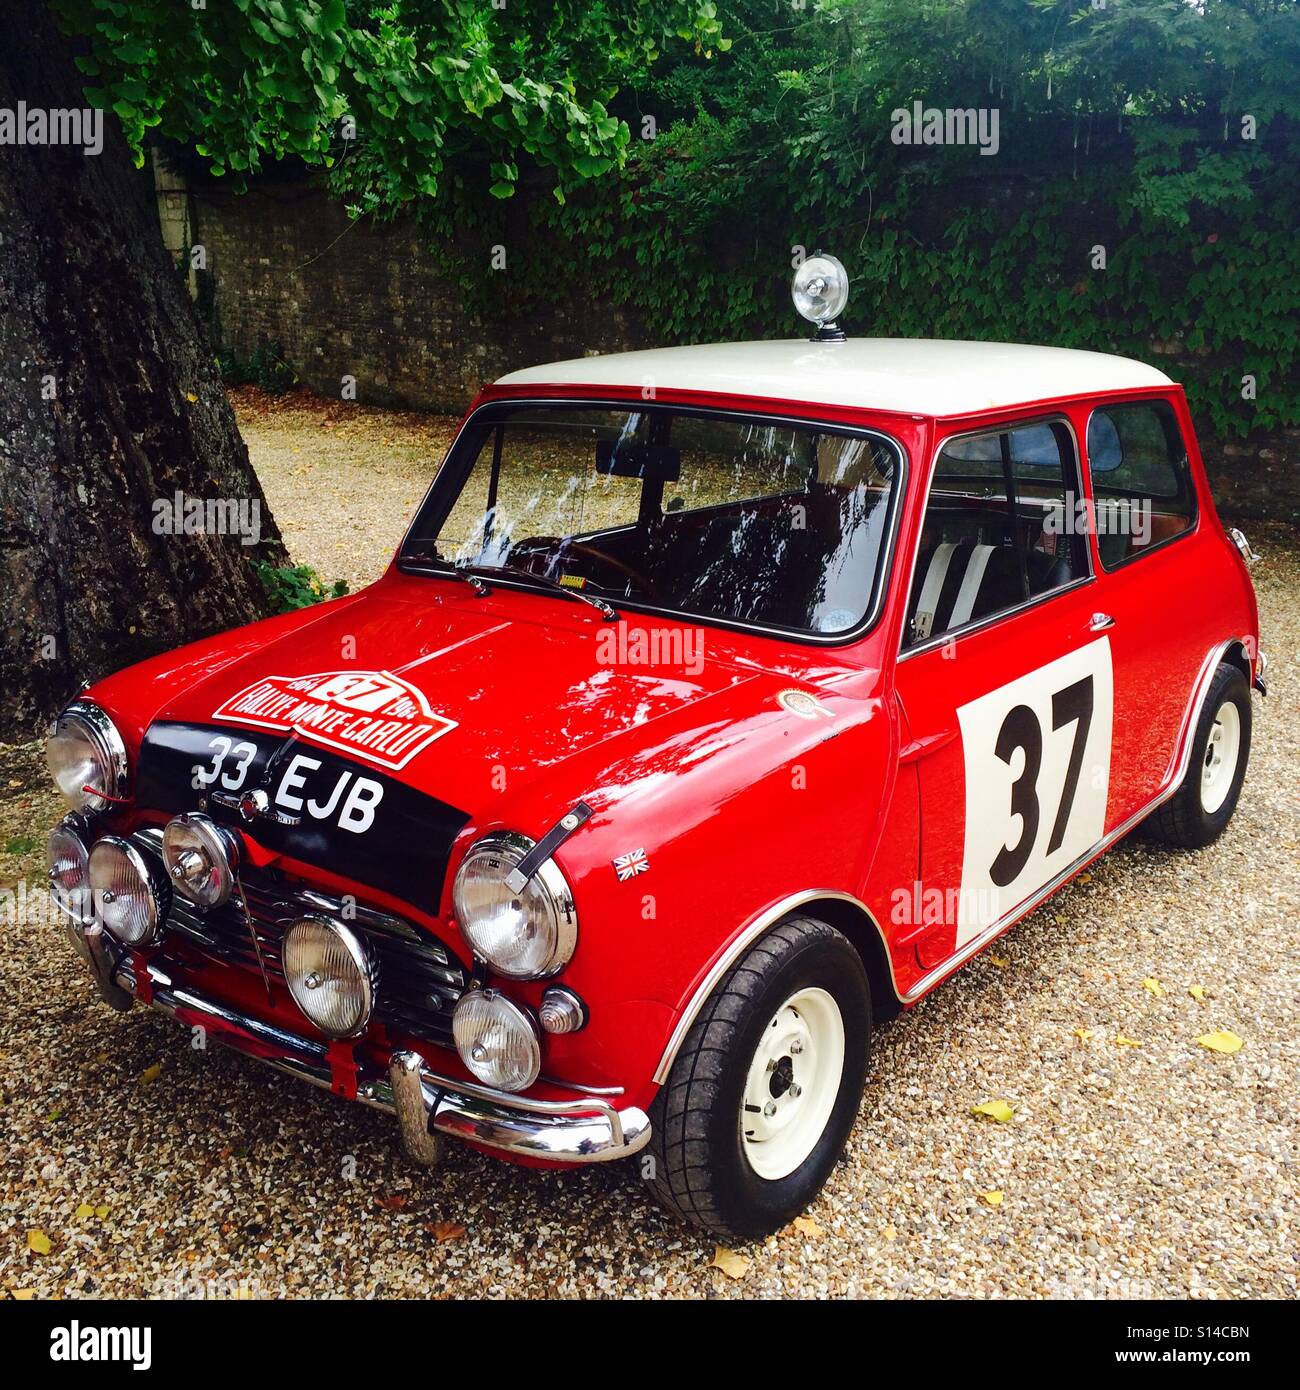 Rally legend Paddy Hopkirk's 1964 Rallye de Monte Carlo gagner Mini Cooper S 33 spécification EJB Banque D'Images